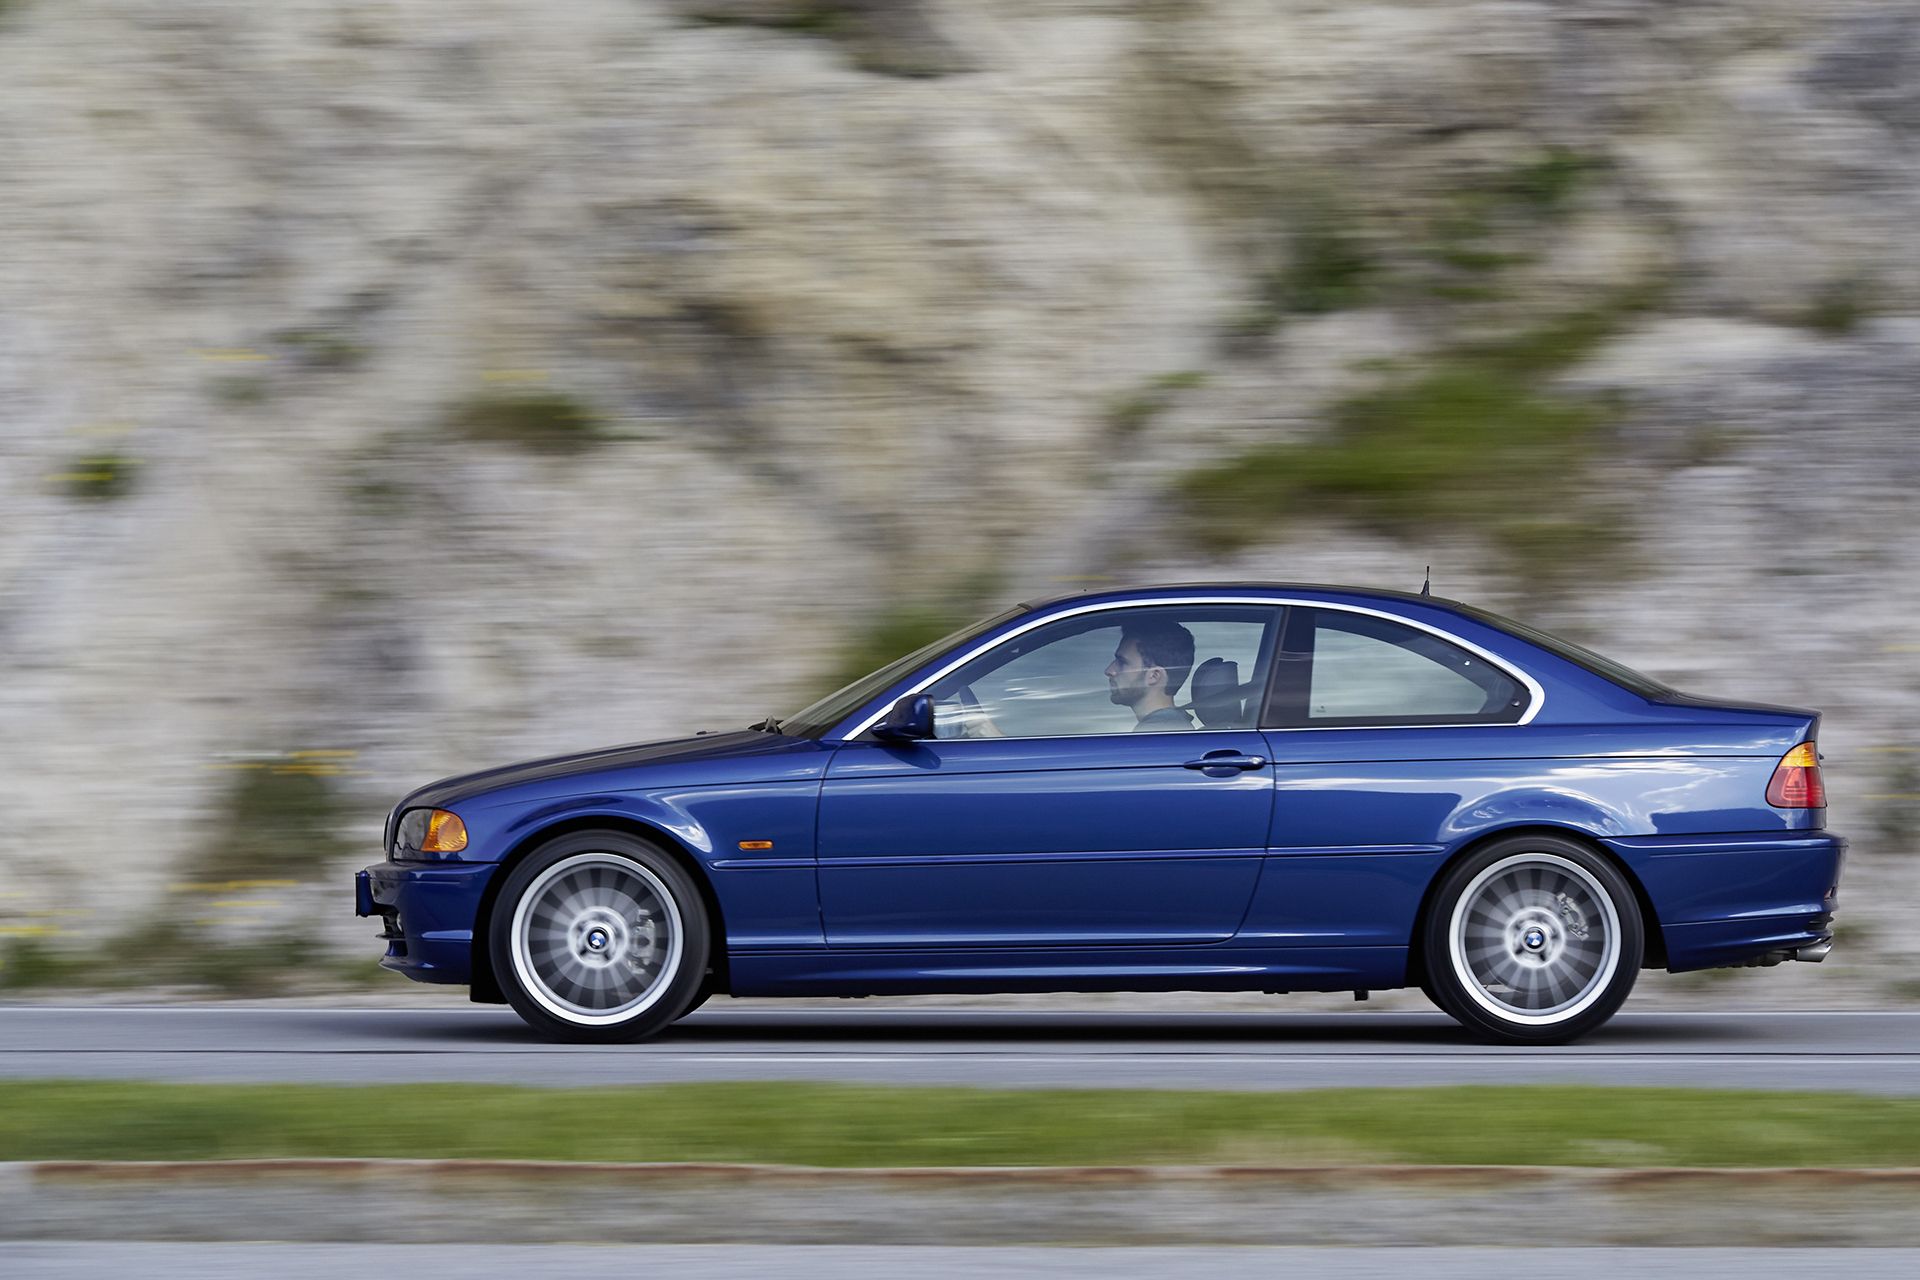 BMW tells owners of older models to stop driving Driving image picture